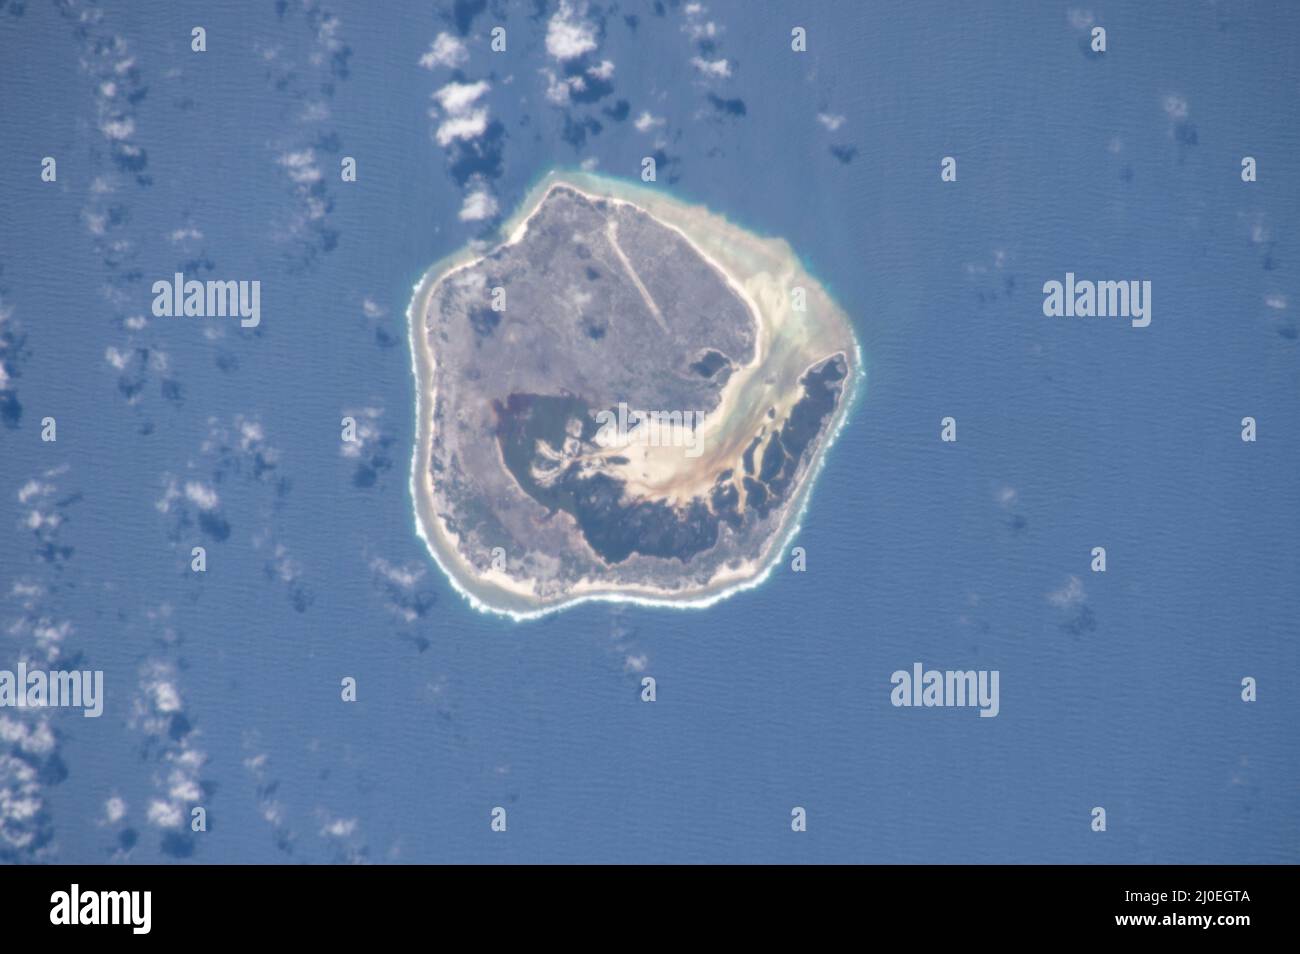 Europa Island, Europa Island, low-lying tropical atoll in the Mozambique Channel, part of French Southern and Antarctic Lands administrative region. Stock Photo